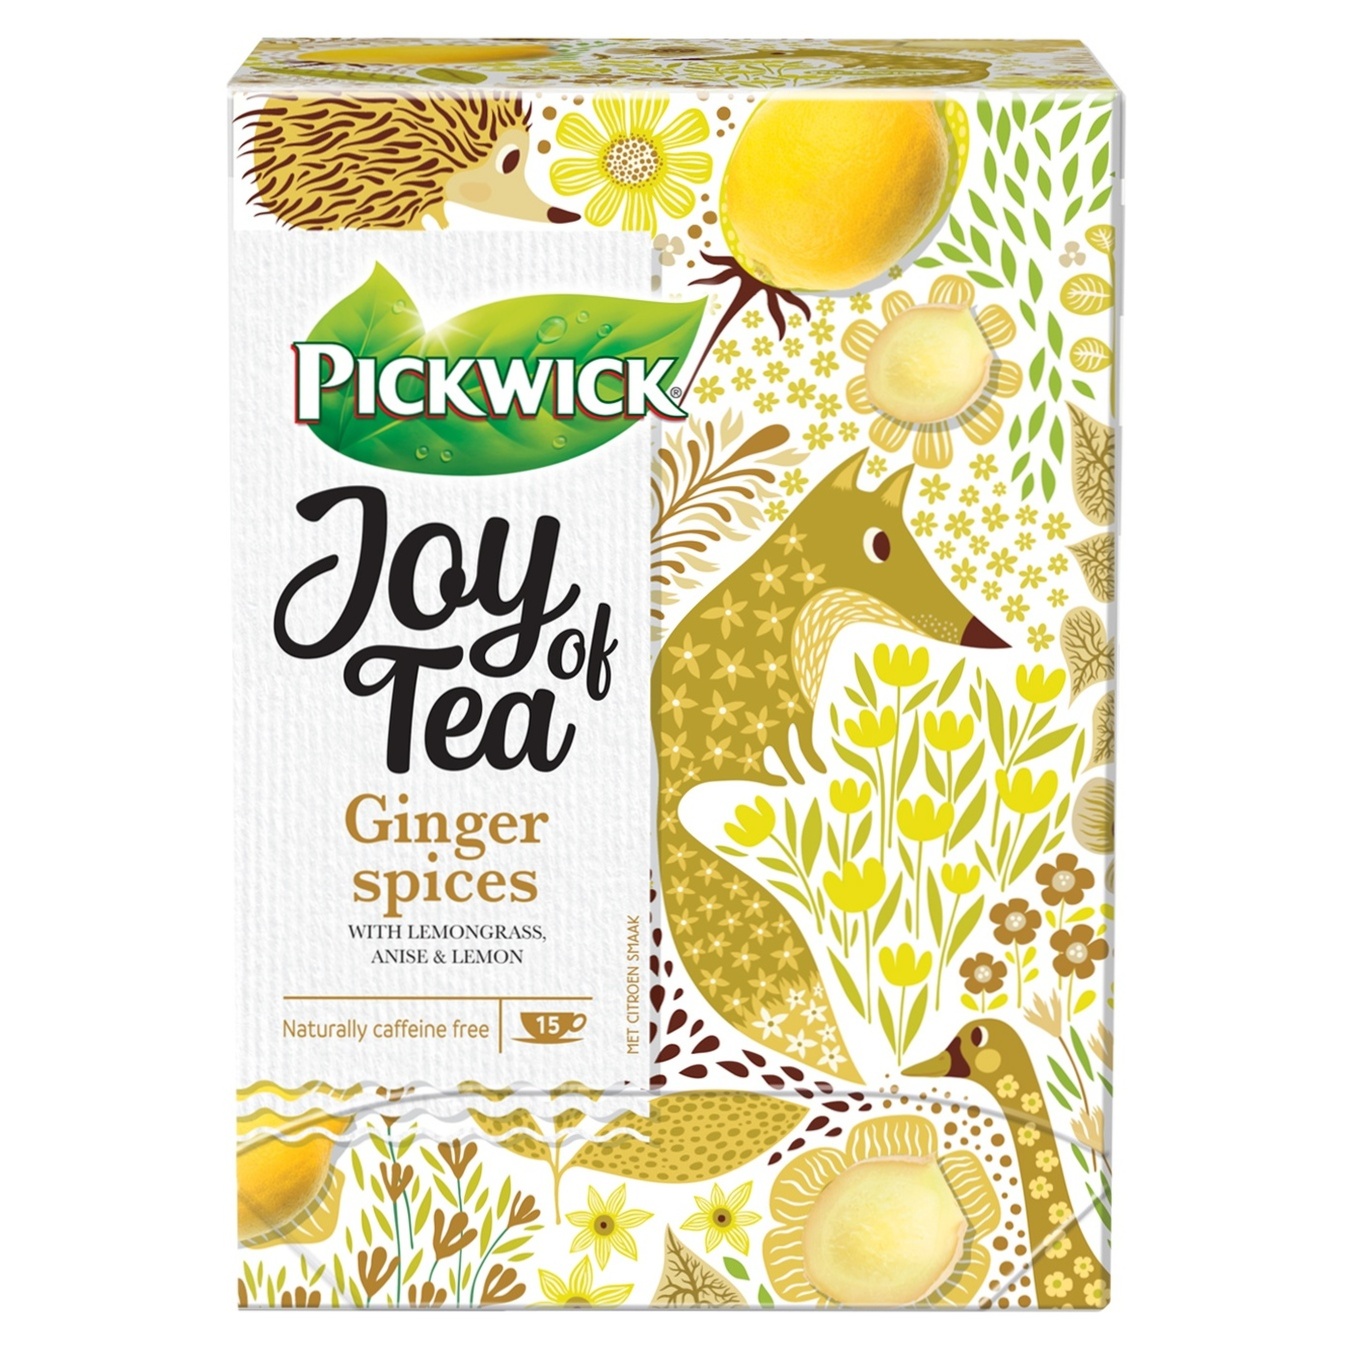 Pickwick tea Ginger and spices 15*1.75g